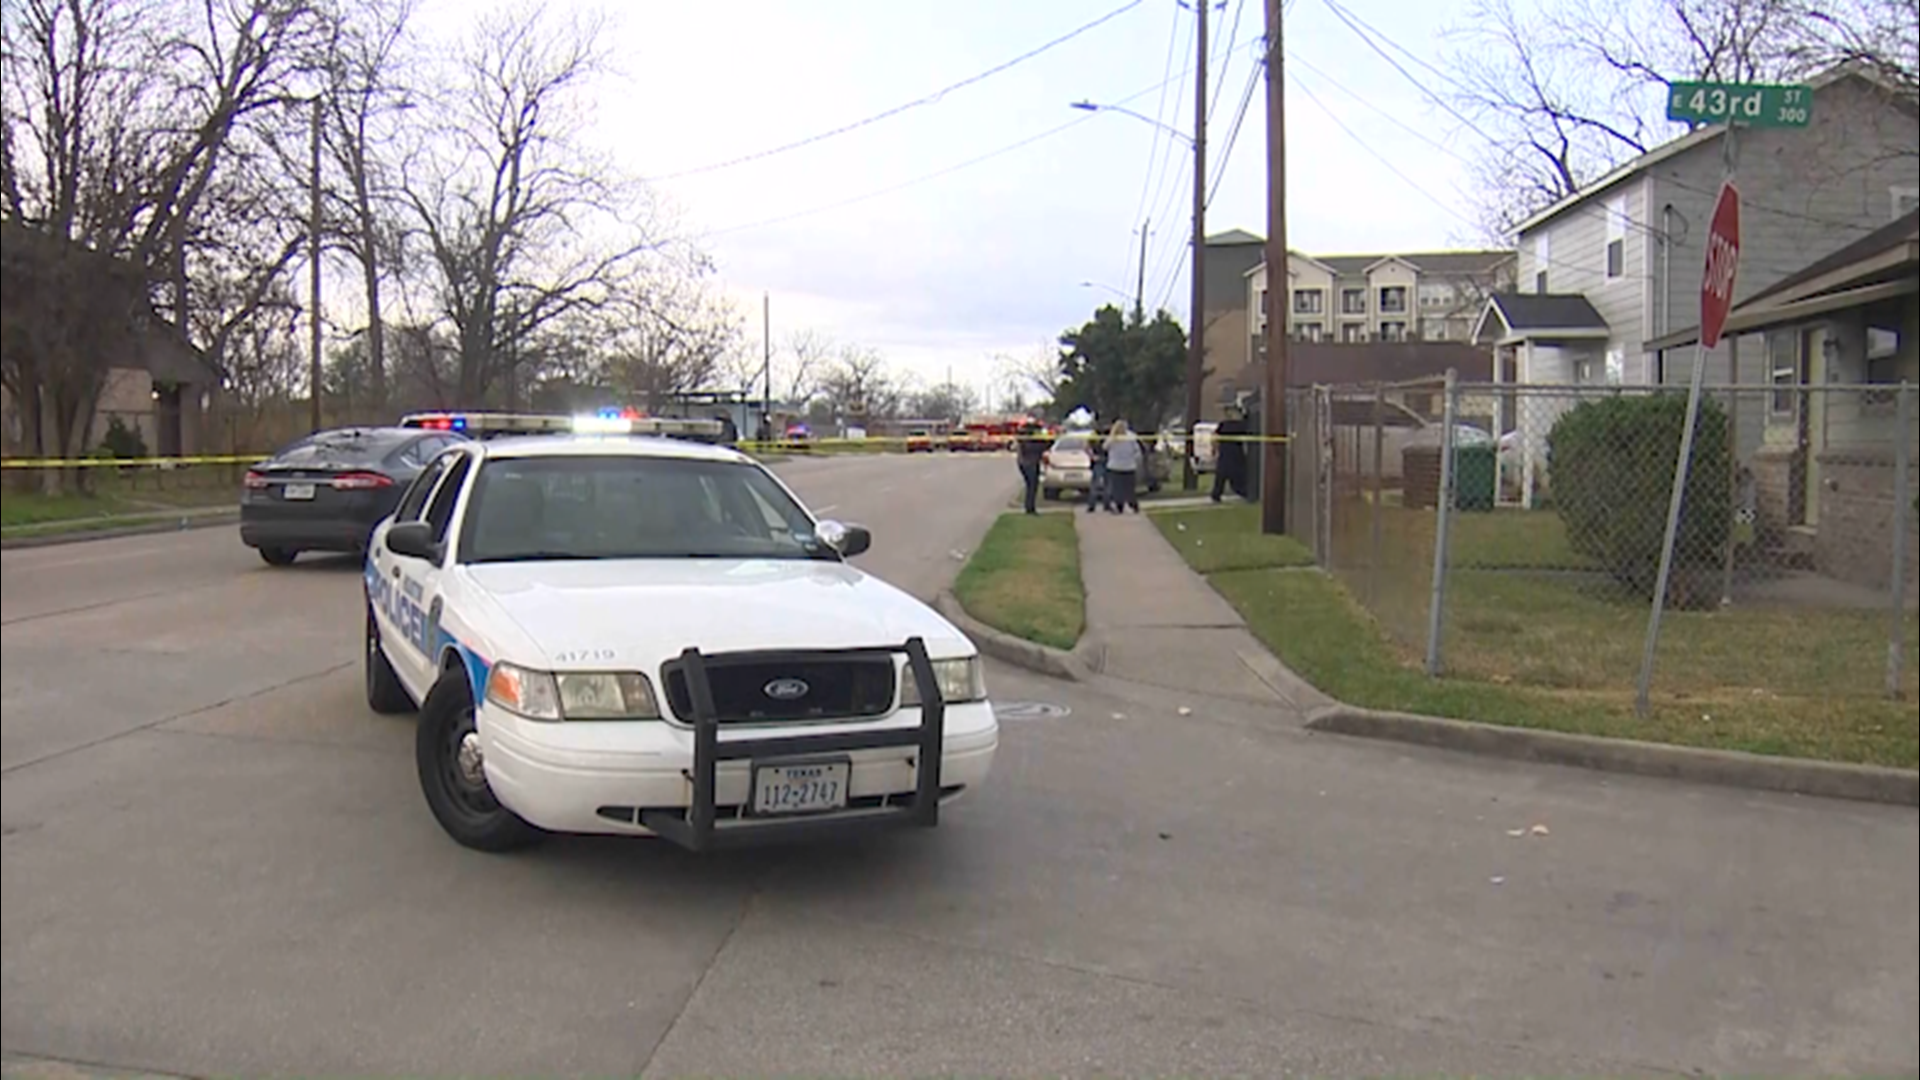 Houston police say an officer shot and wounded a murder suspect who opened fire on him and several innocent bystanders in north Houston Monday afternoon.